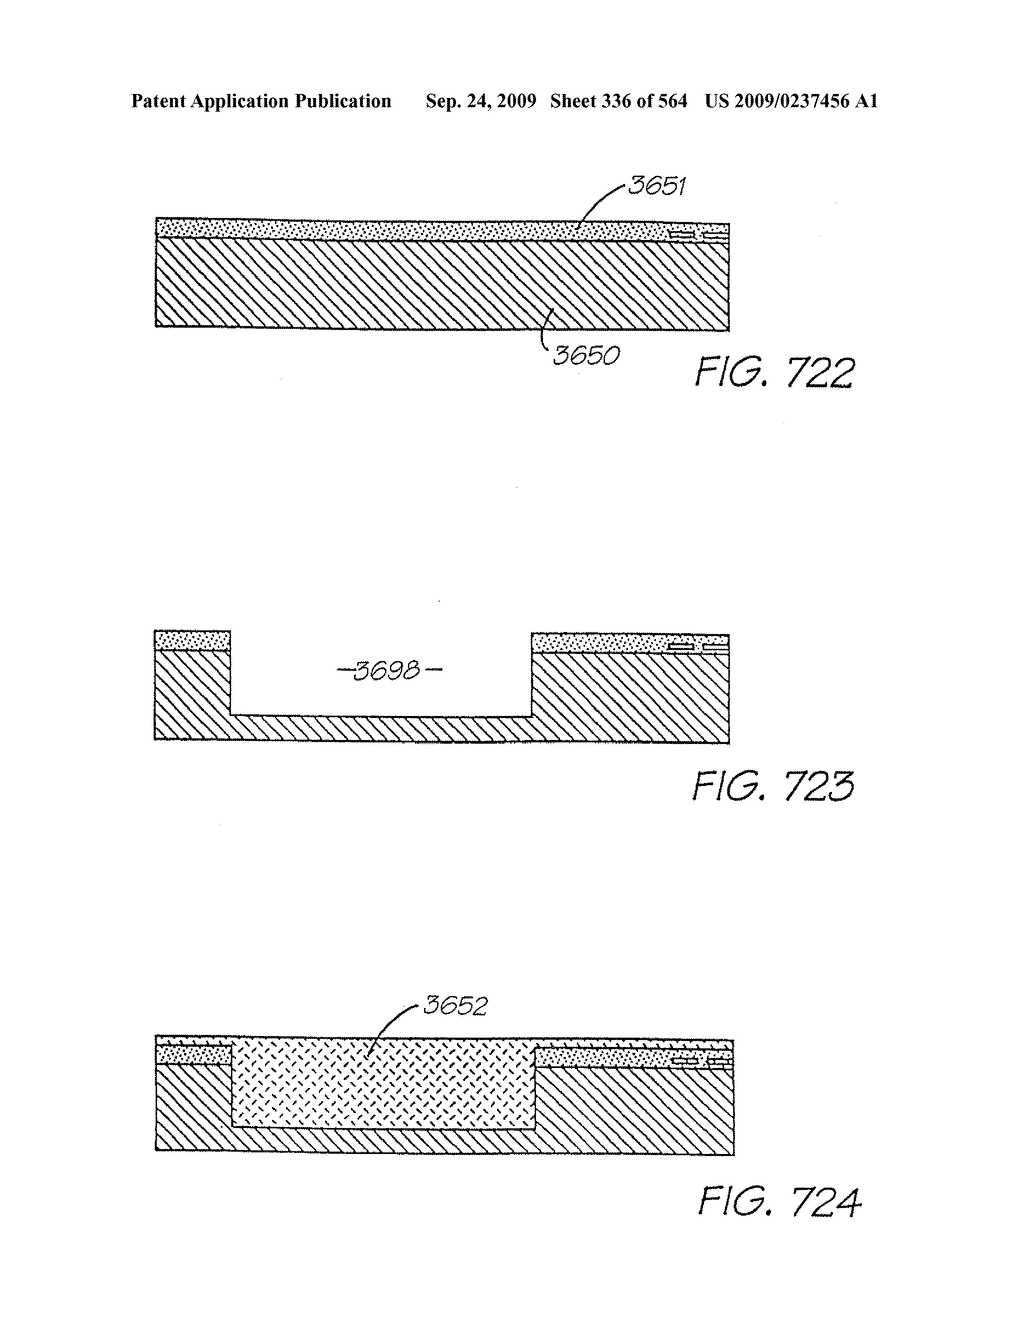 Inkjet Printhead With Paddle For Ejecting Ink From One Of Two Nozzles - diagram, schematic, and image 337